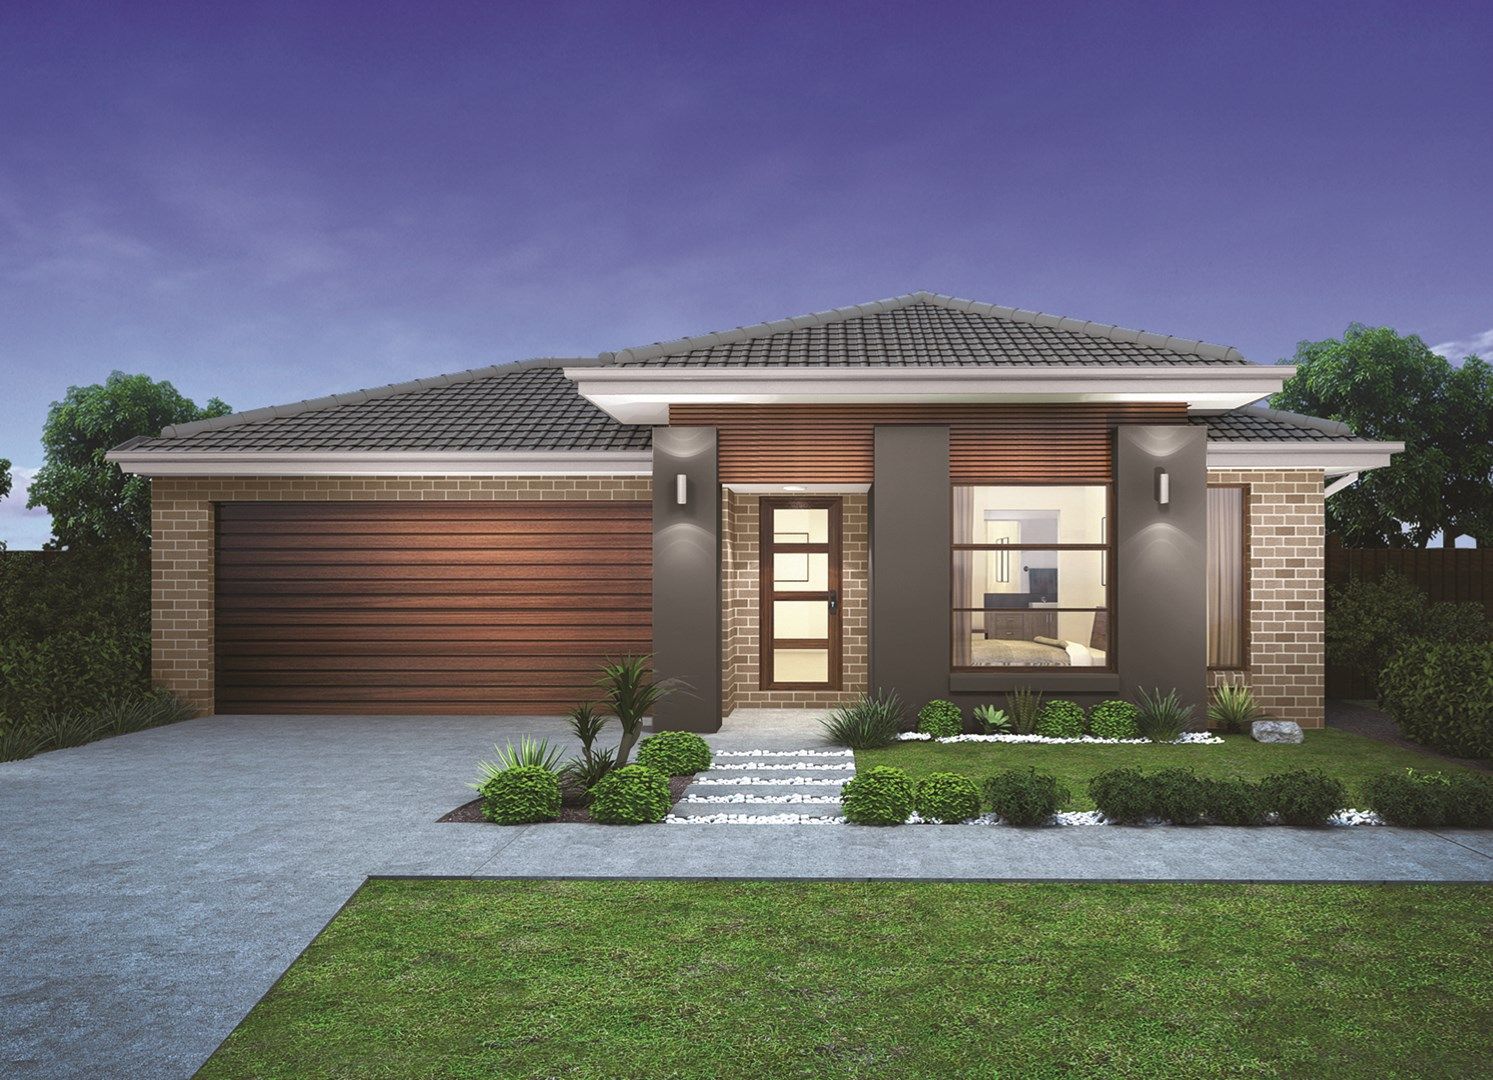 4 bedrooms New House & Land in Lot 24 Oakden Estate Churchill 220 DRYSDALE VIC, 3222